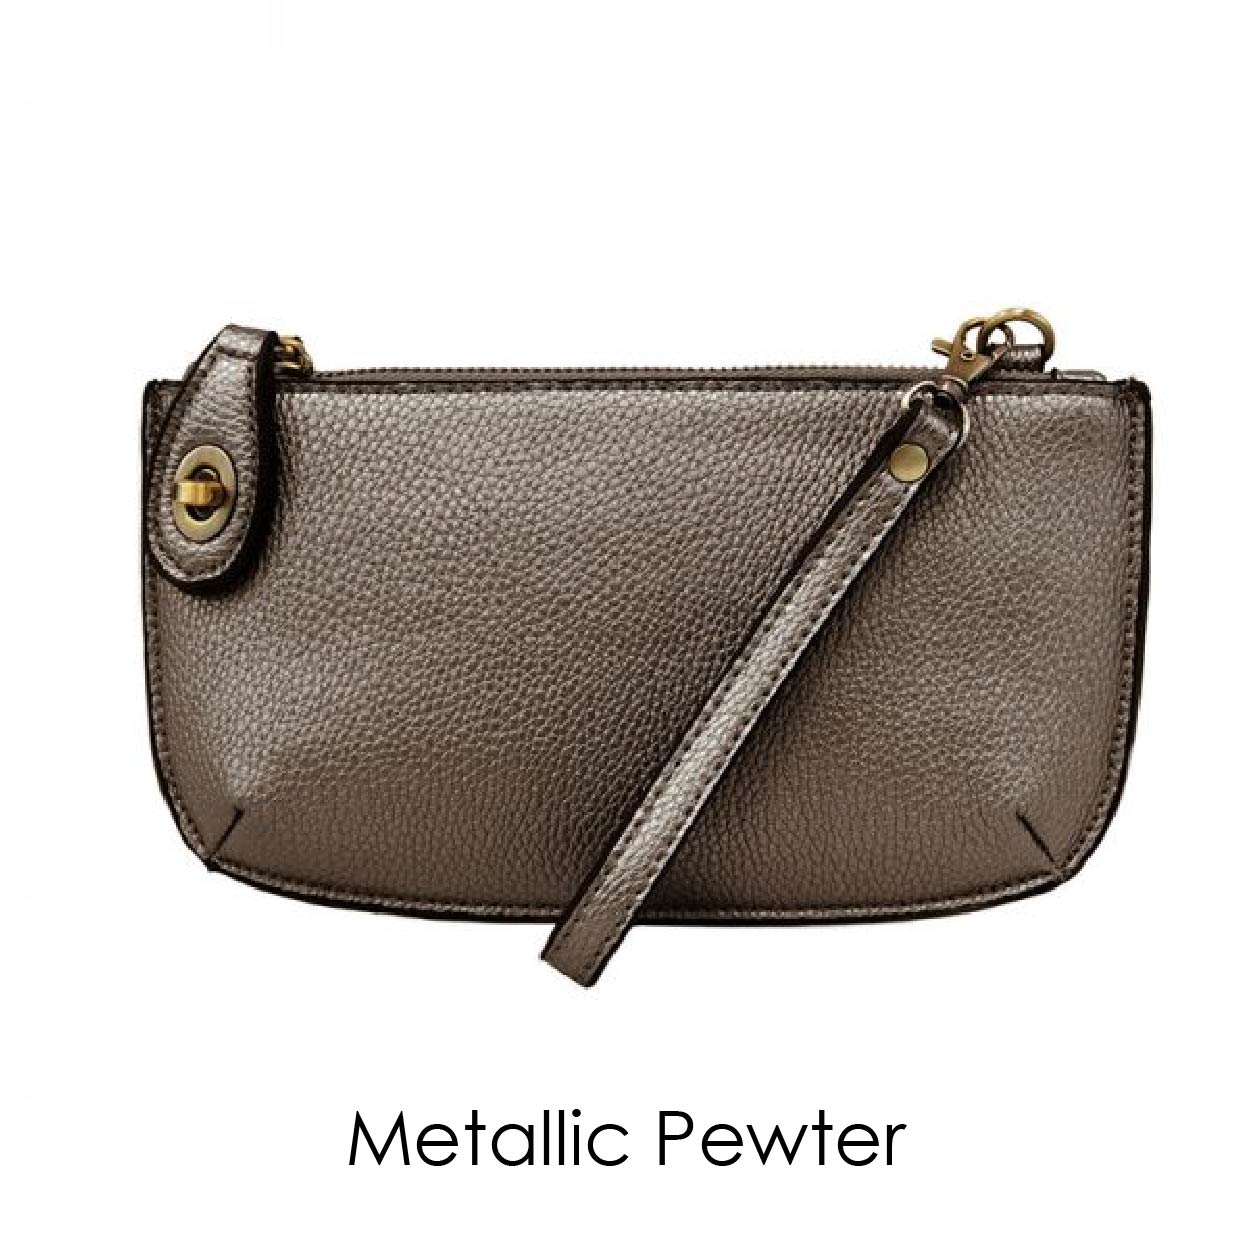 metallic pewter leather clutch on a white background